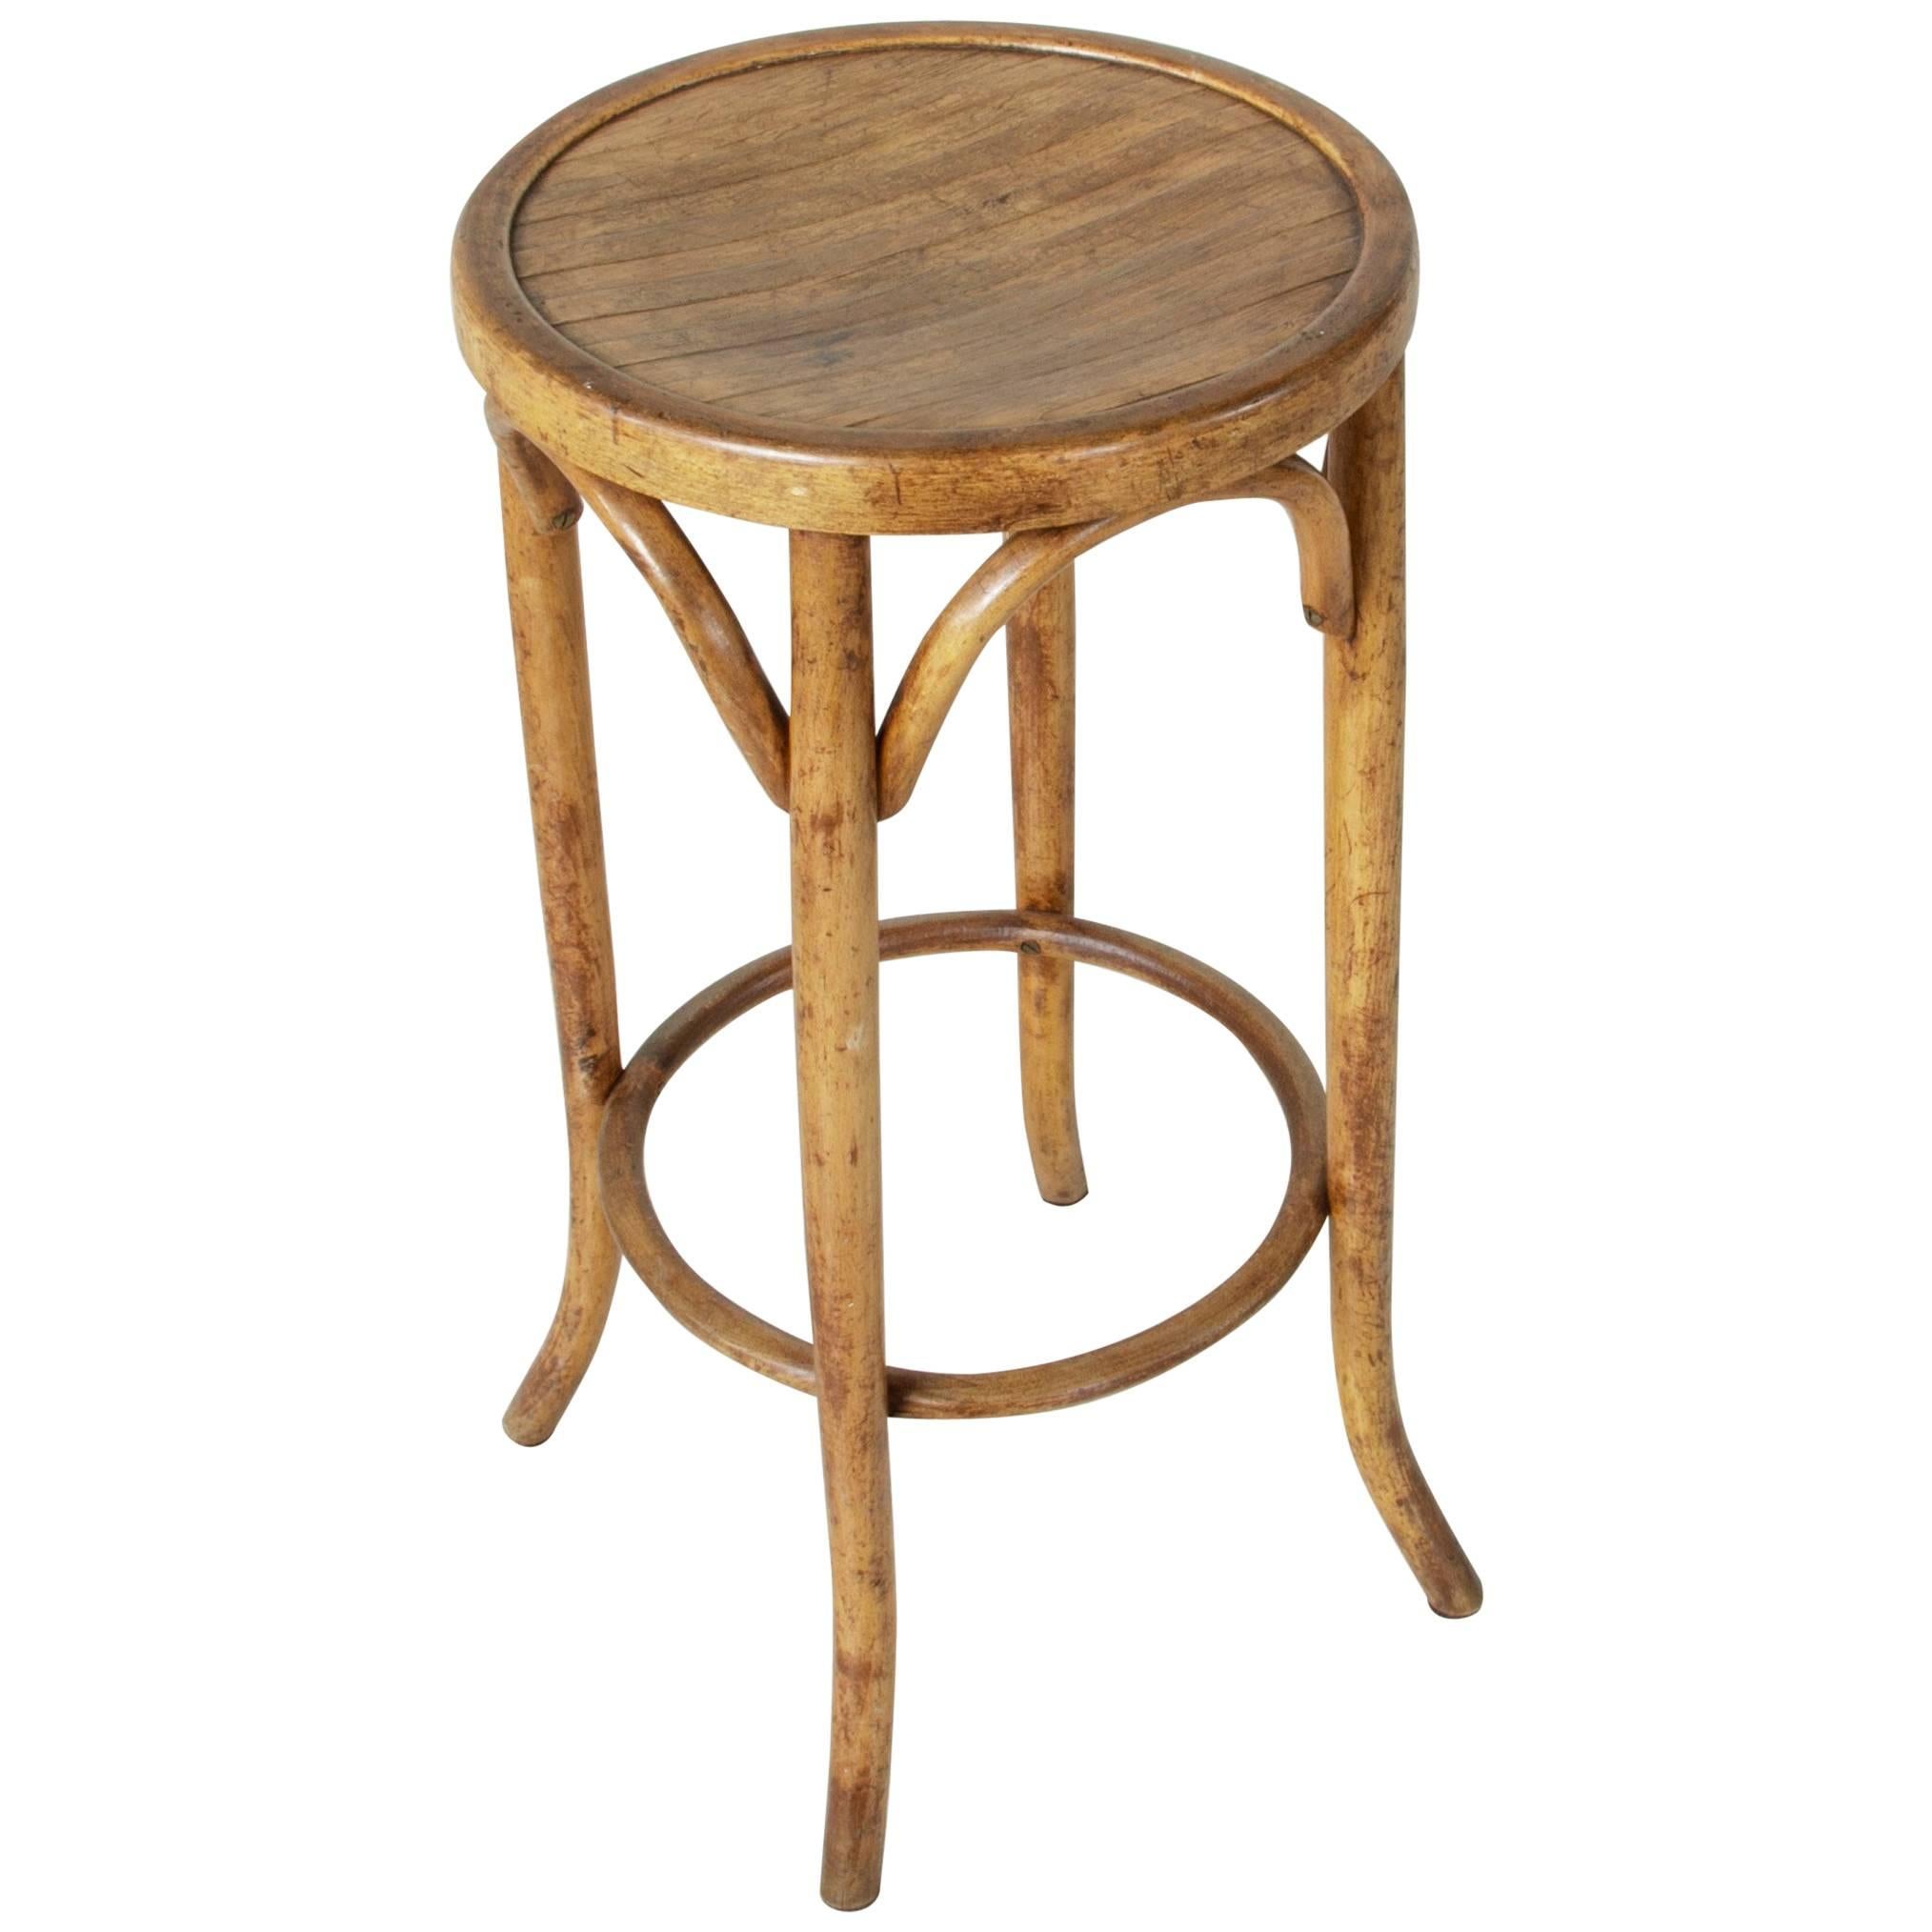 Early 20th Century French Bentwood Bar Stool, Thonet Chair